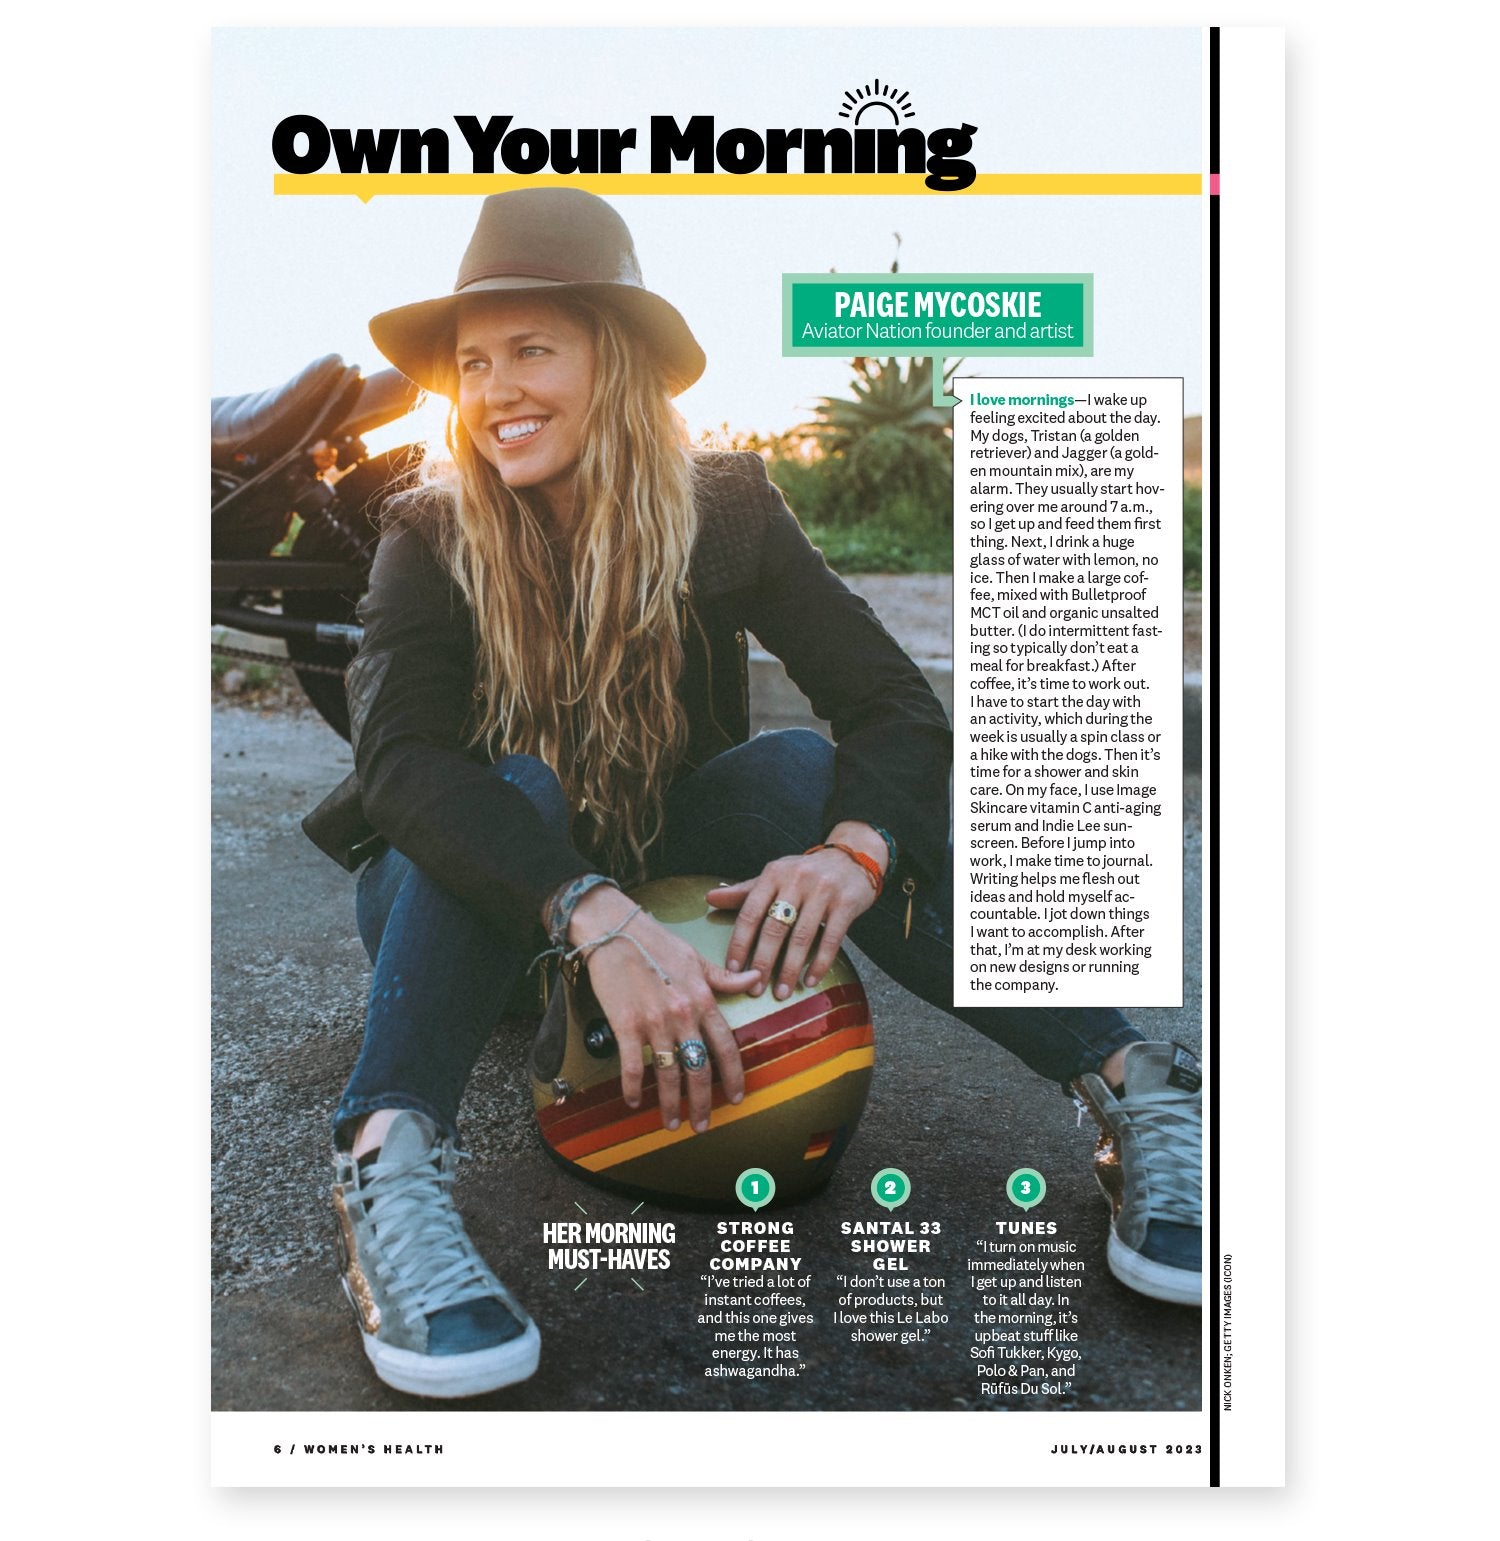 Women's Health: Own Your Morning